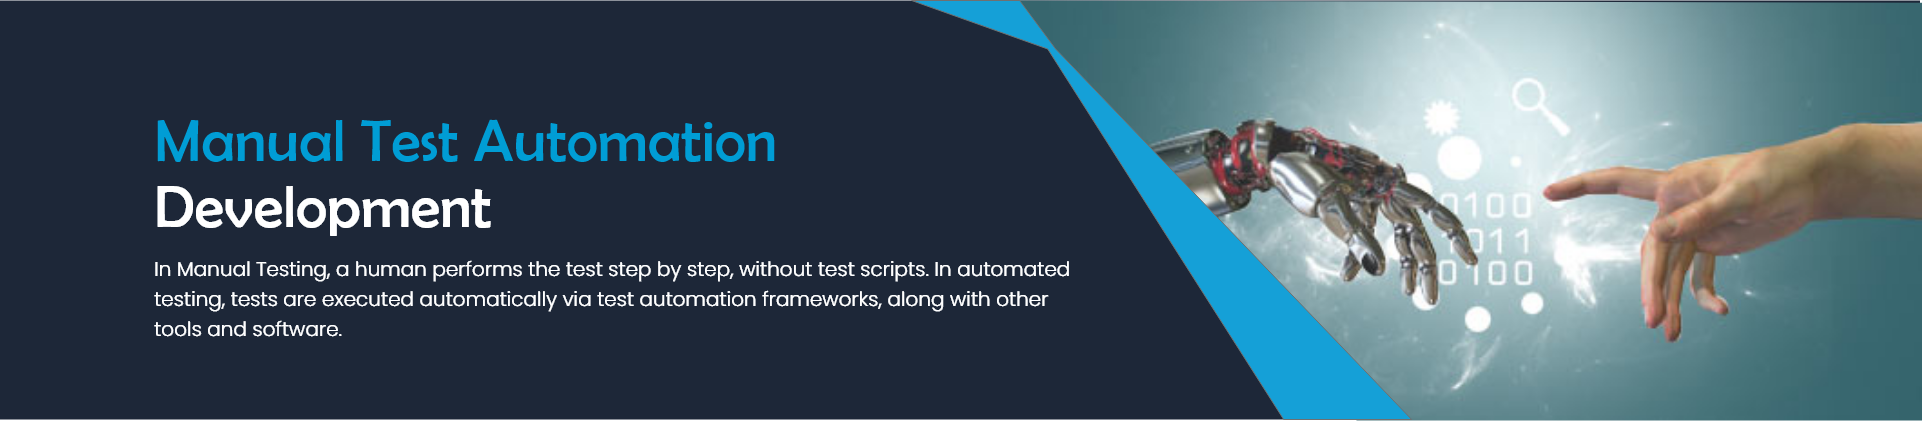 Manual Test Automation